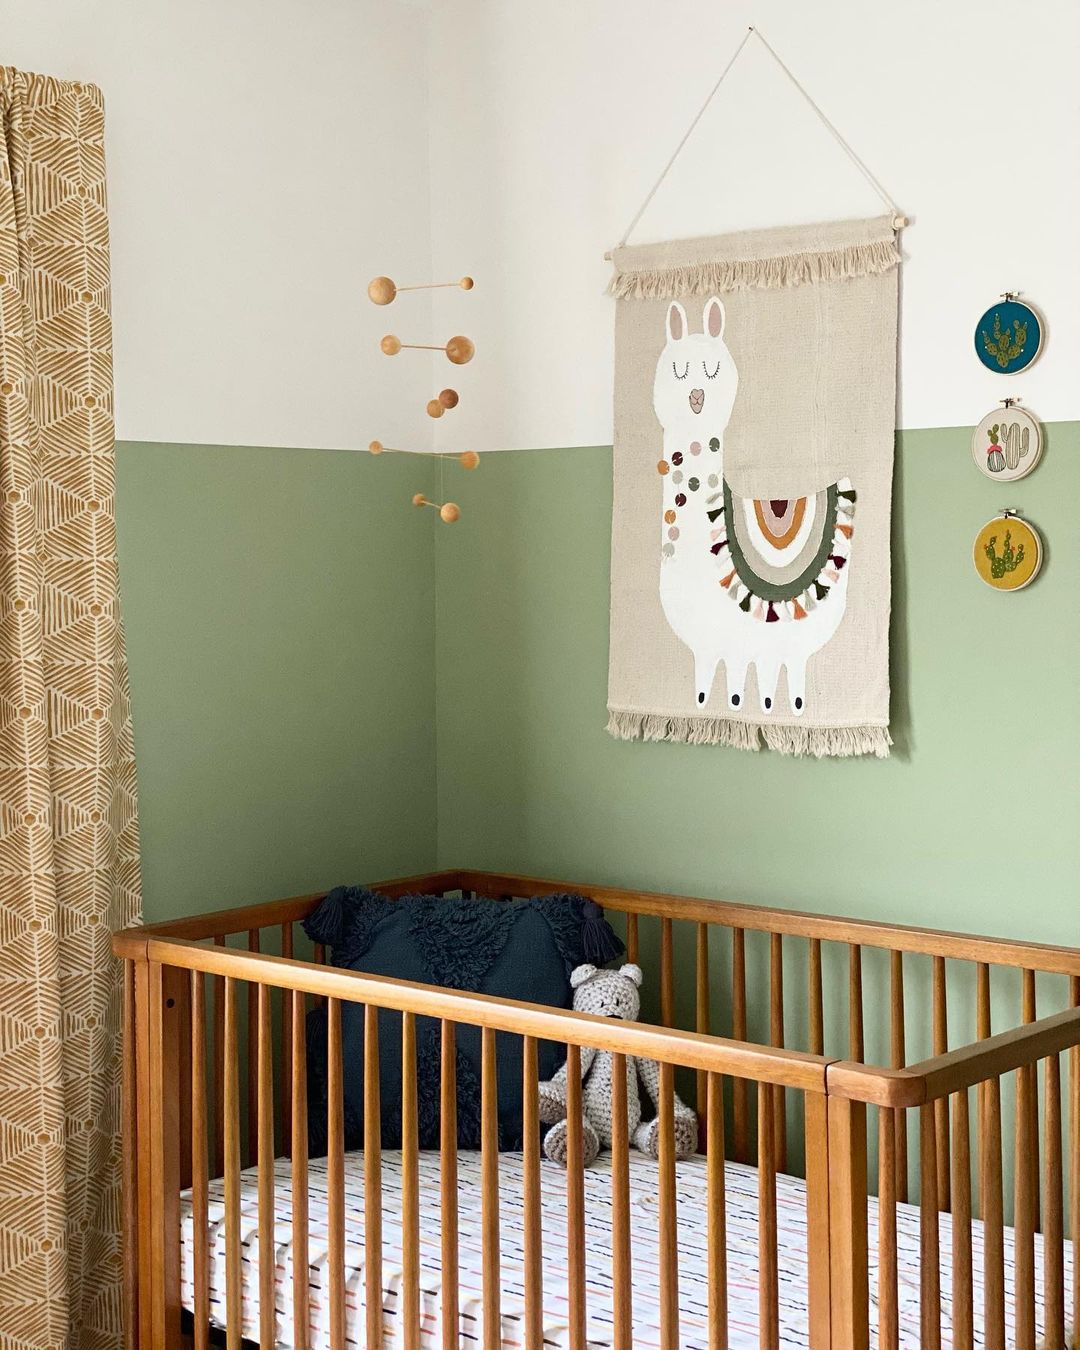 A nursery with the wall painted green halfway up, then white above that point. There is an alpaca tapestry hanging above a wooden crib. Photo by Instagram user @halfacrehomedesign.